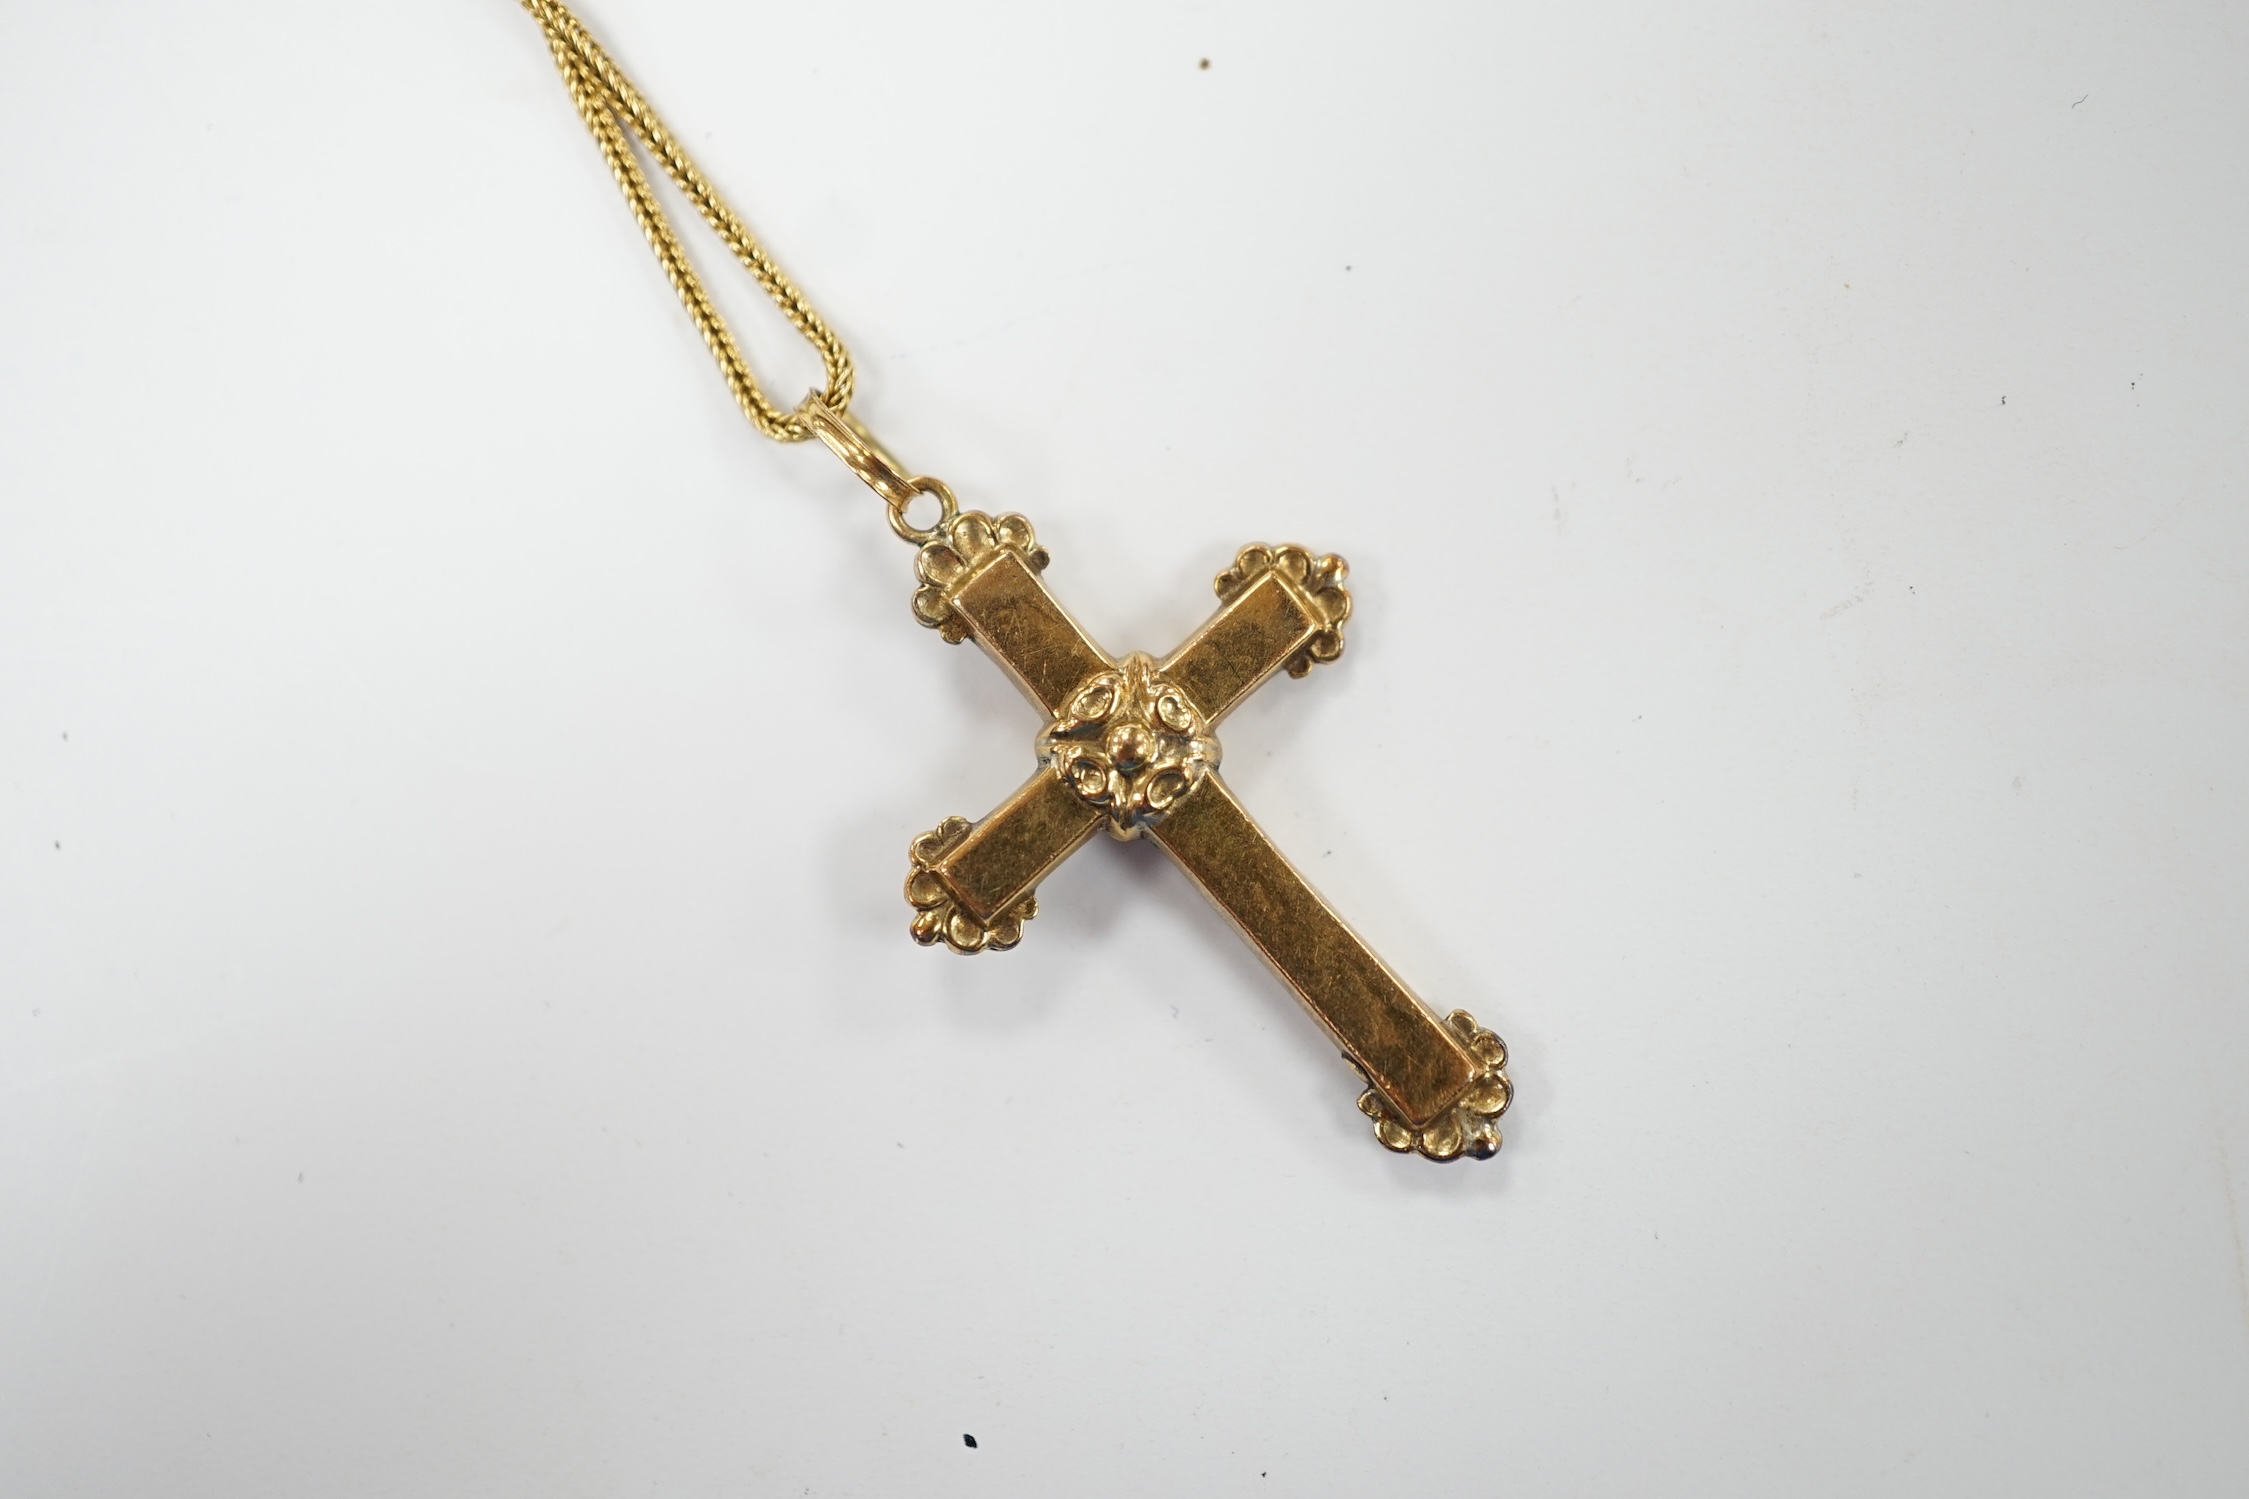 A yellow metal, black enamel and seed pearl set cross pendant, 30mm, on a yellow metal fine link chain, 38cm, gross weight 4.2 grams. Fair condition.